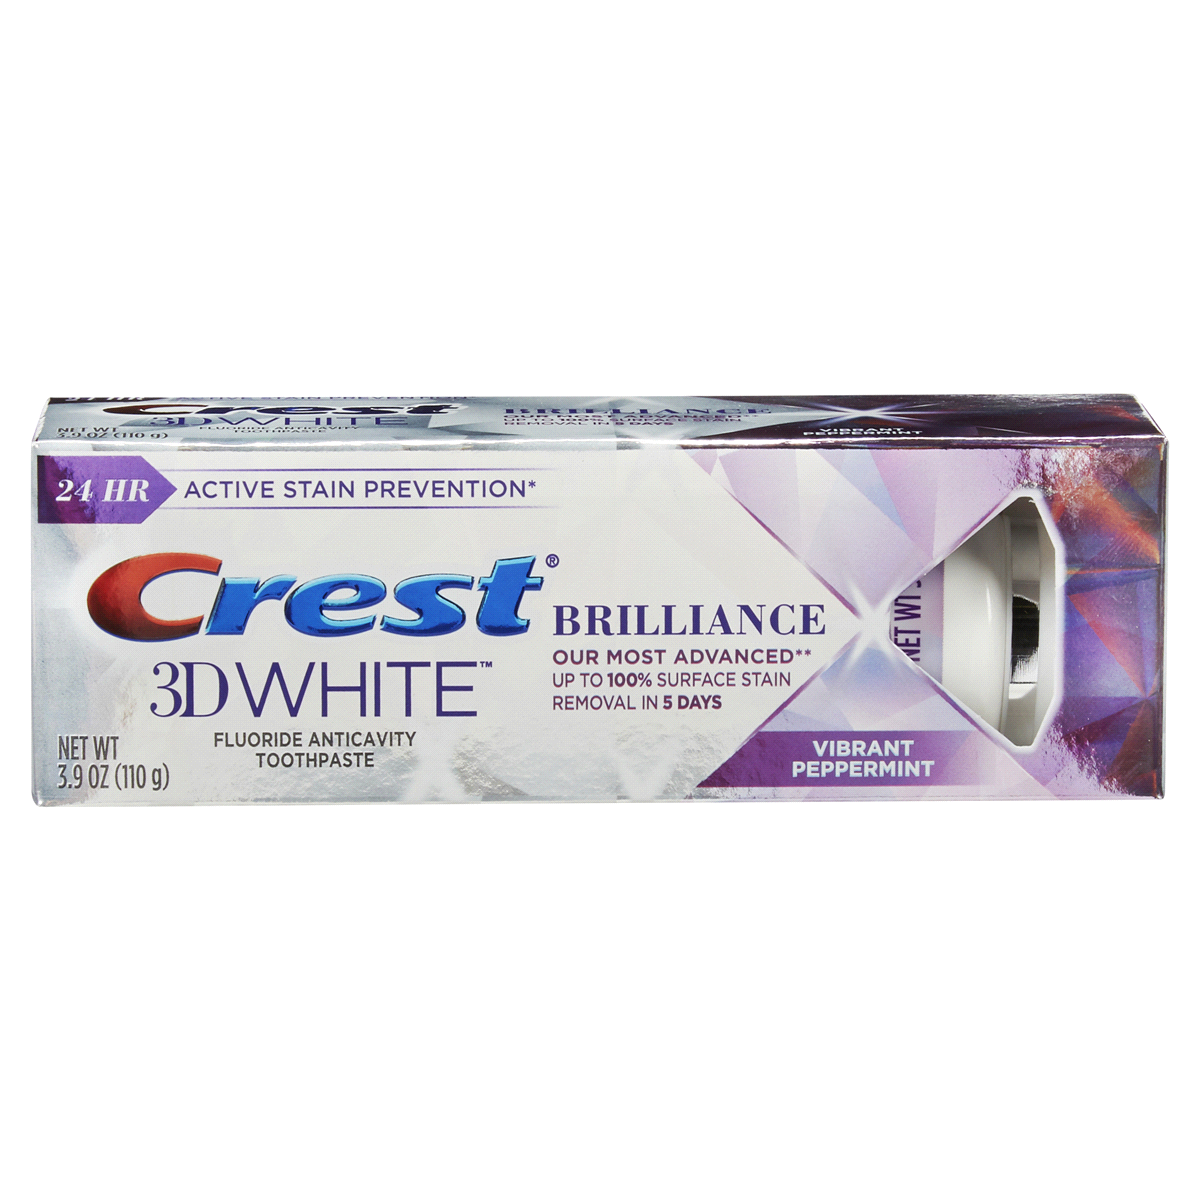 slide 1 of 1, Crest 3D White Brilliance Vibrant Peppermint Fluoride Anticavity Toothpaste, 3.9 oz